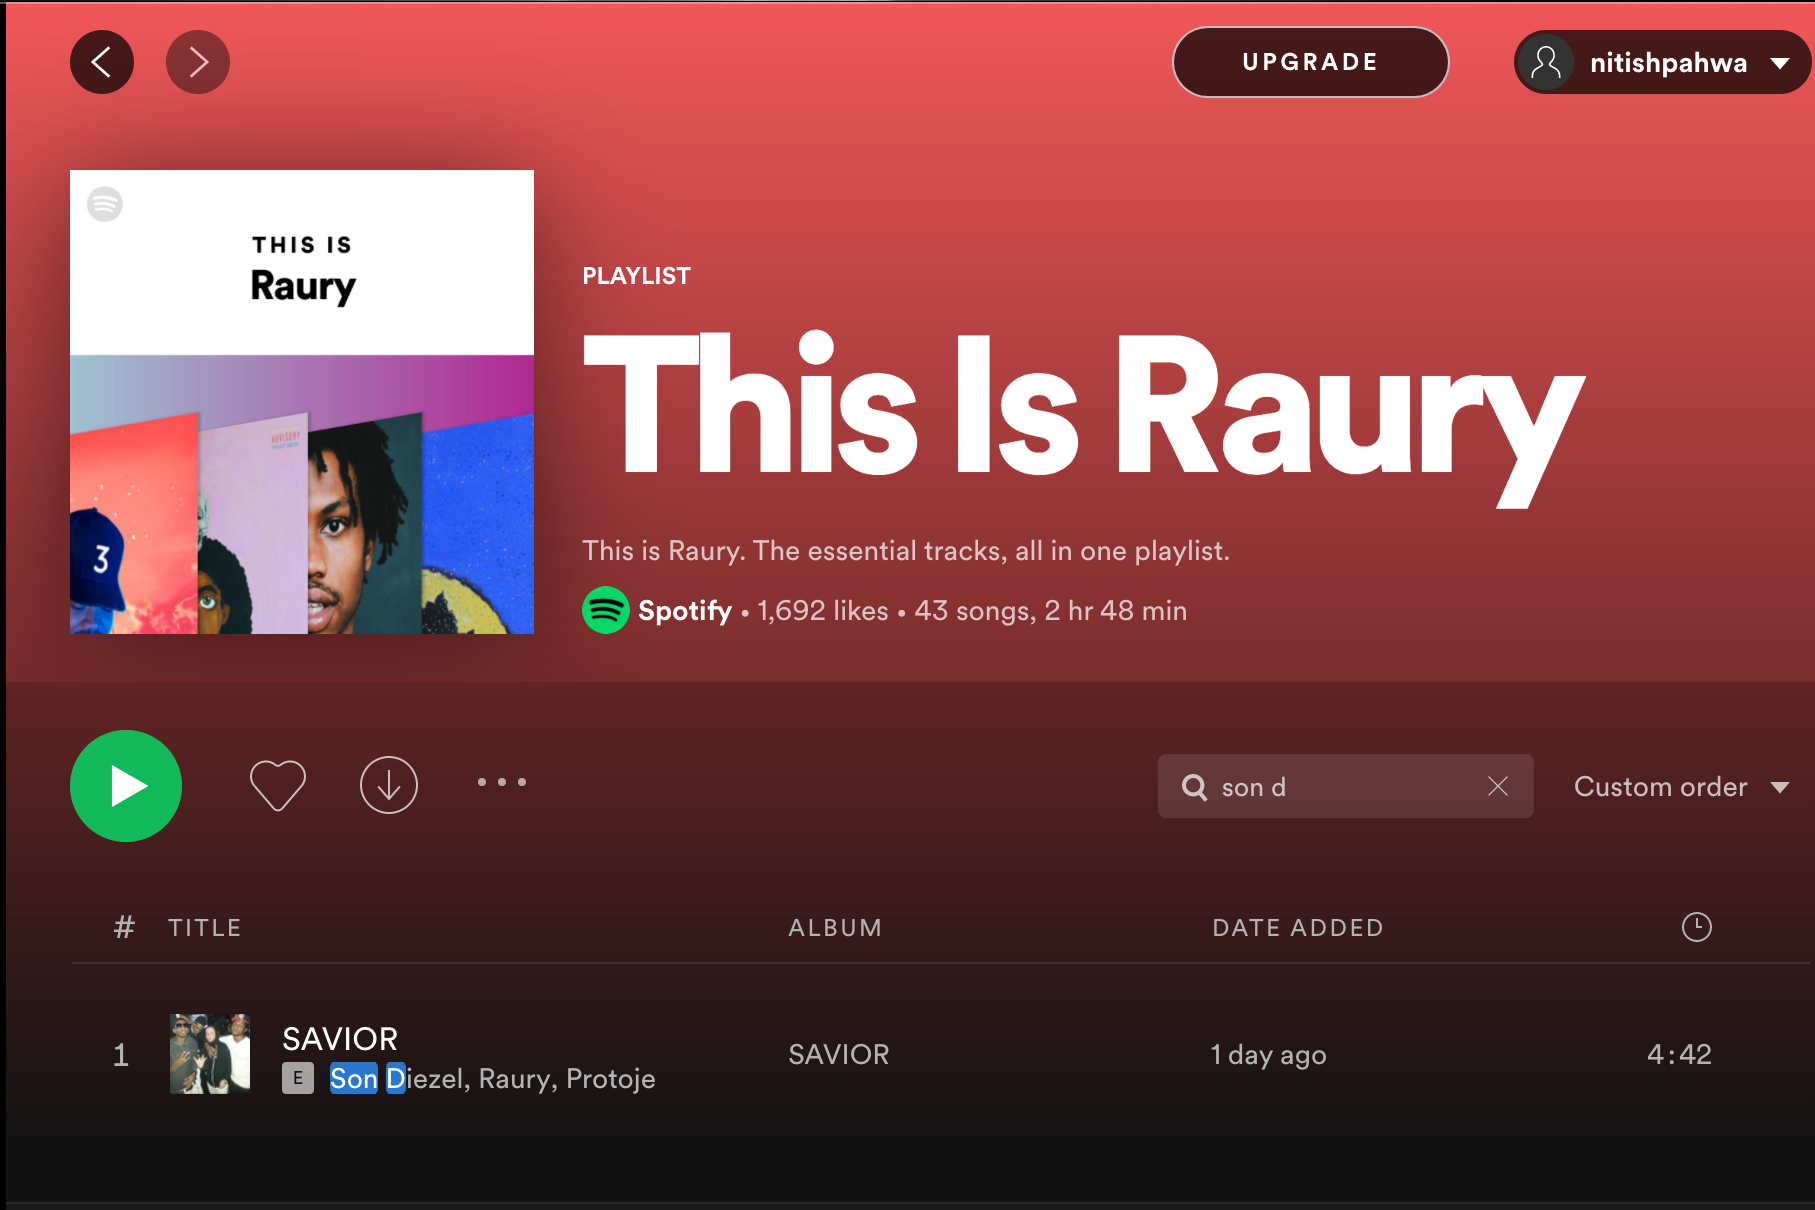 This Is Raury Spotify playlist page listing the track "SAVIOR" by artists Son Diezel, Raury, and Protoje